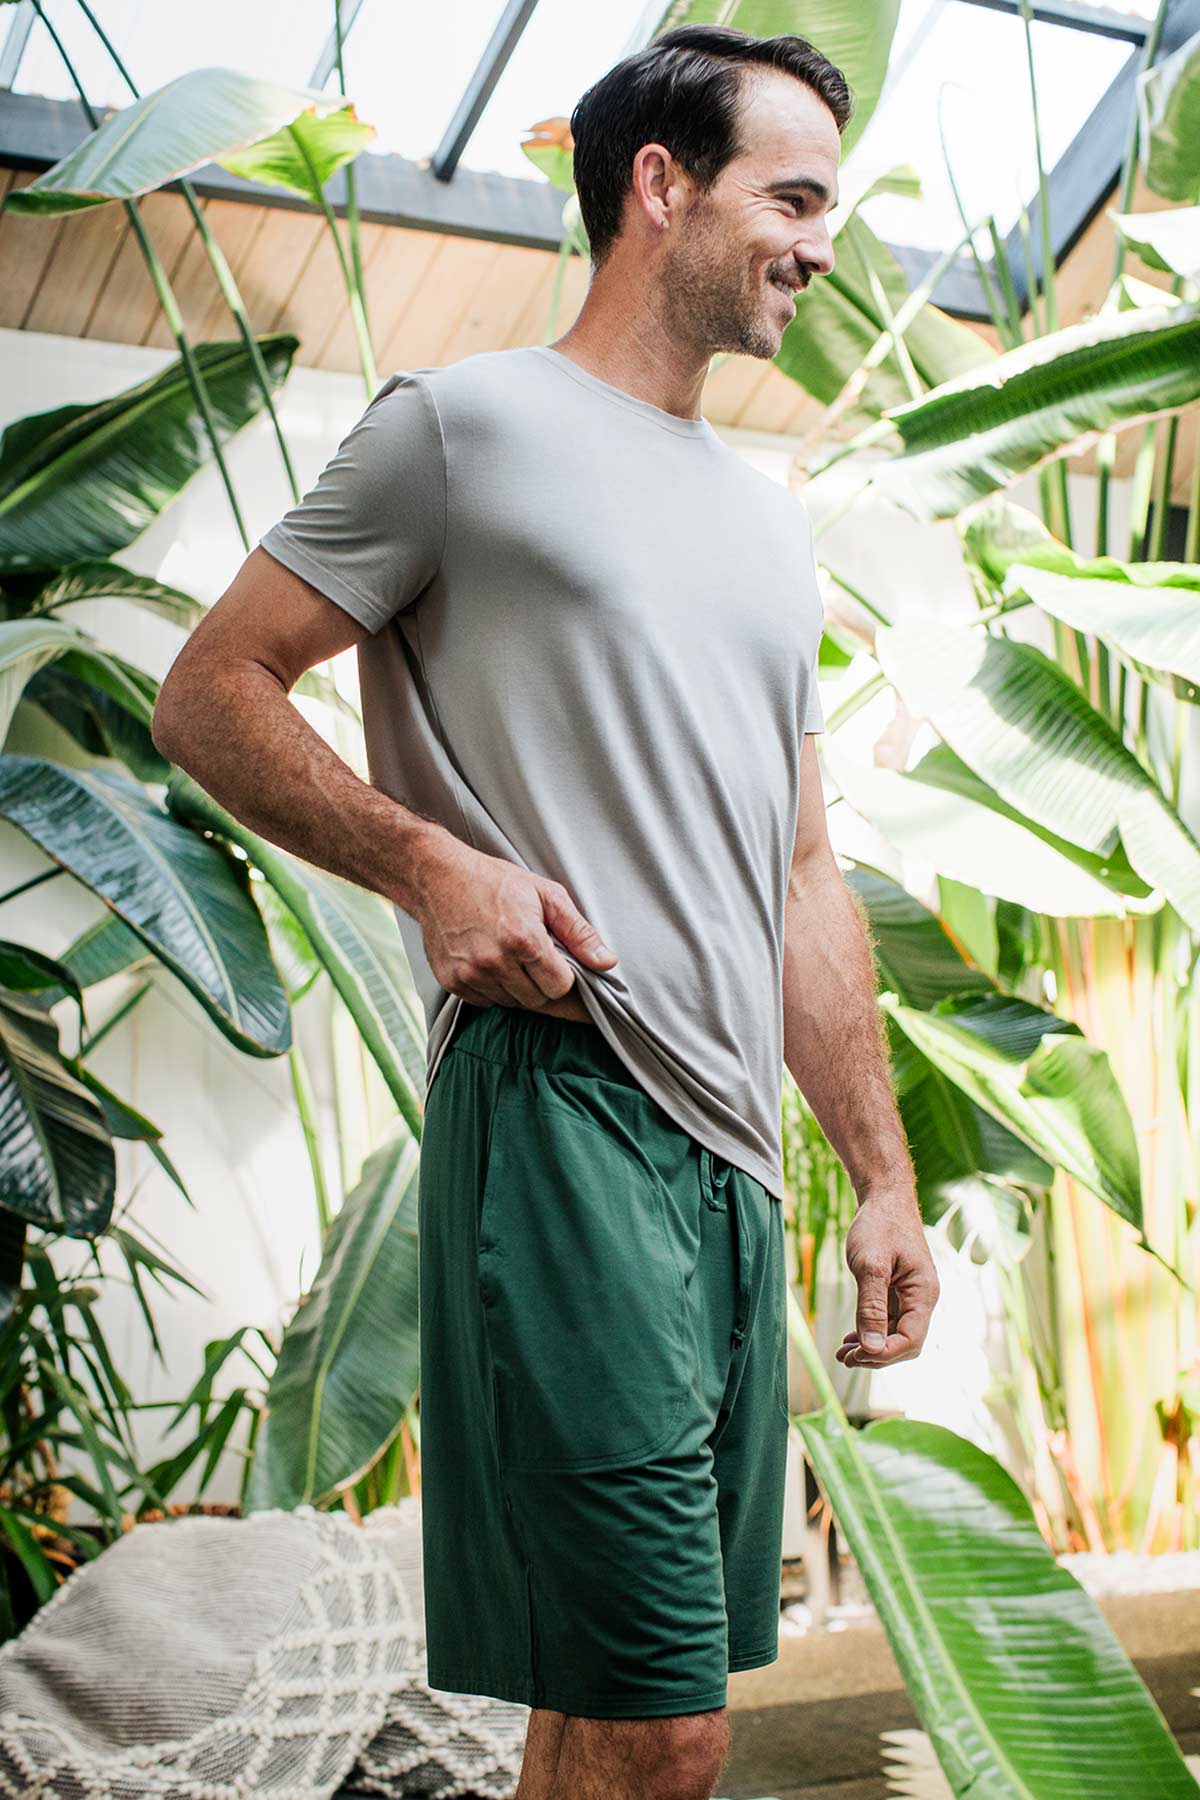 A man standing facing to the side while adjusting the hem of his shirt, a smile on his face, wearing Yala Men's Mateo ButterSoft Bamboo Lounge Shorts in Evergreen